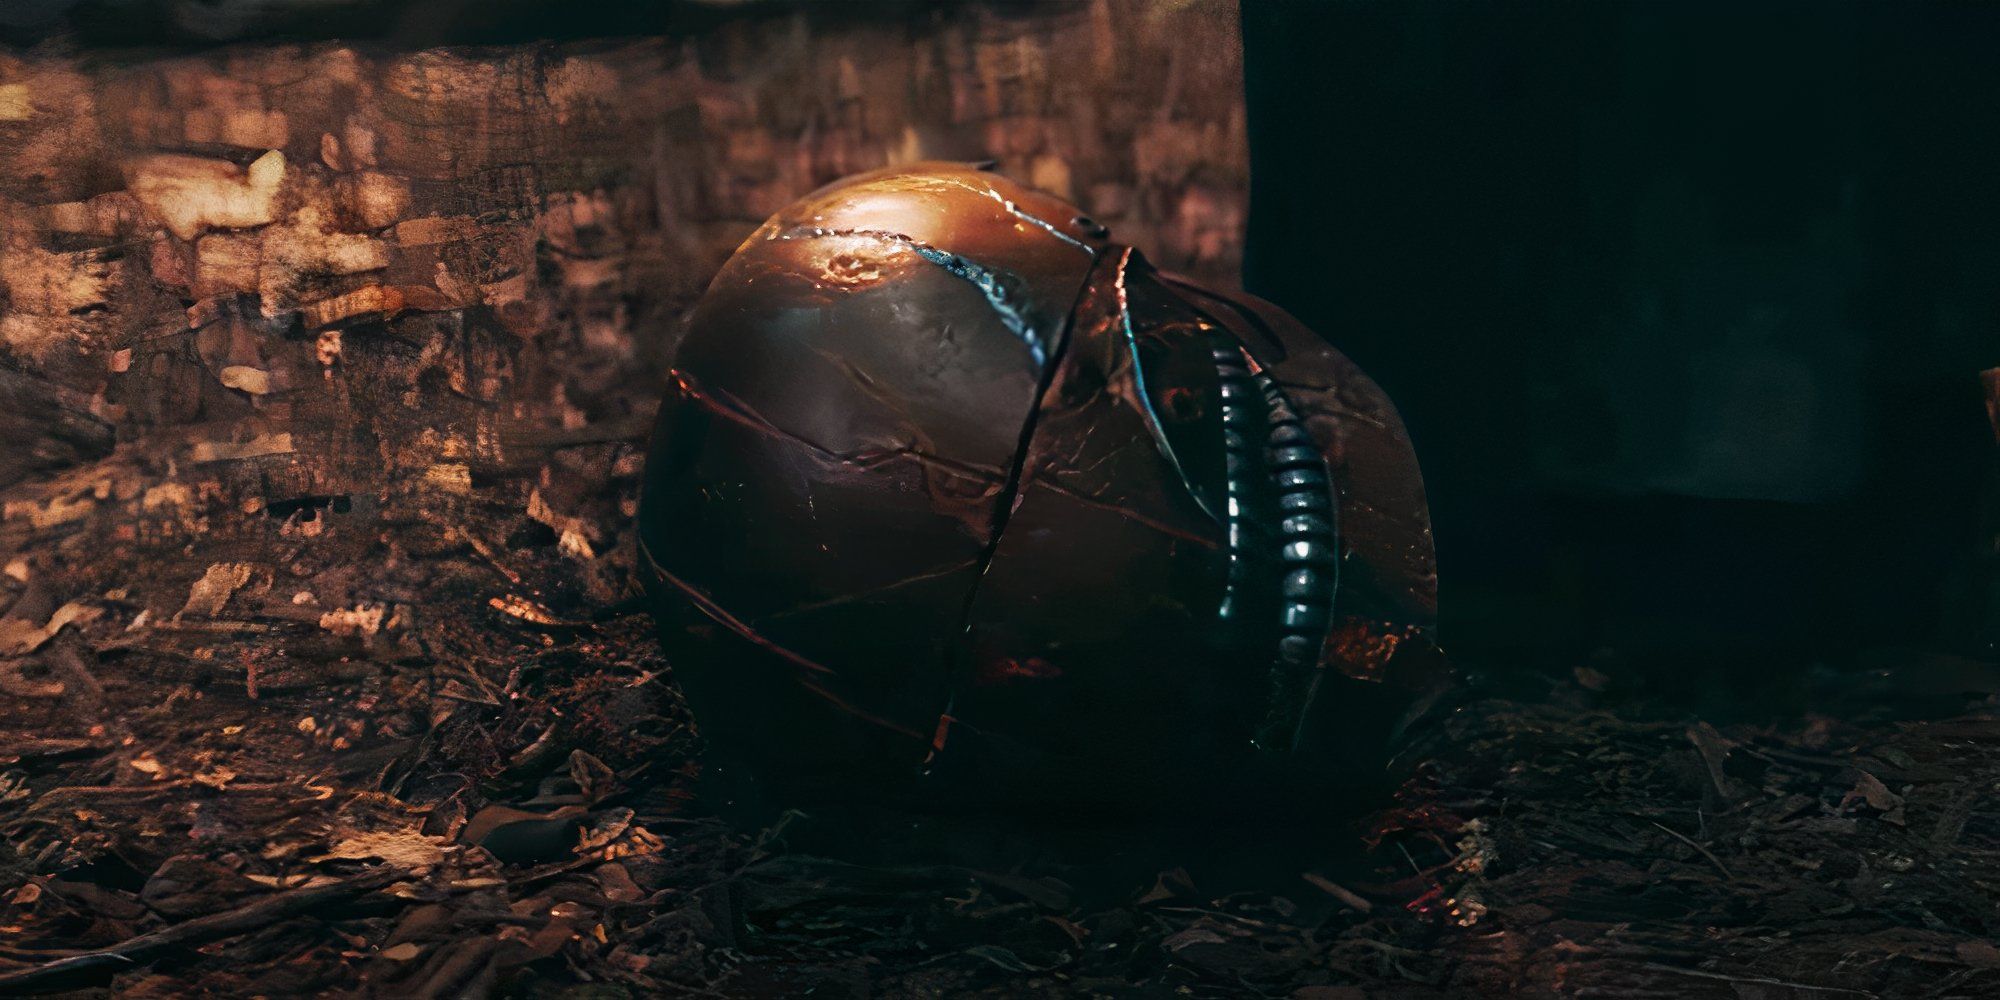 The mysterious Sith's helmet lays on the ground with a black cloak nearby